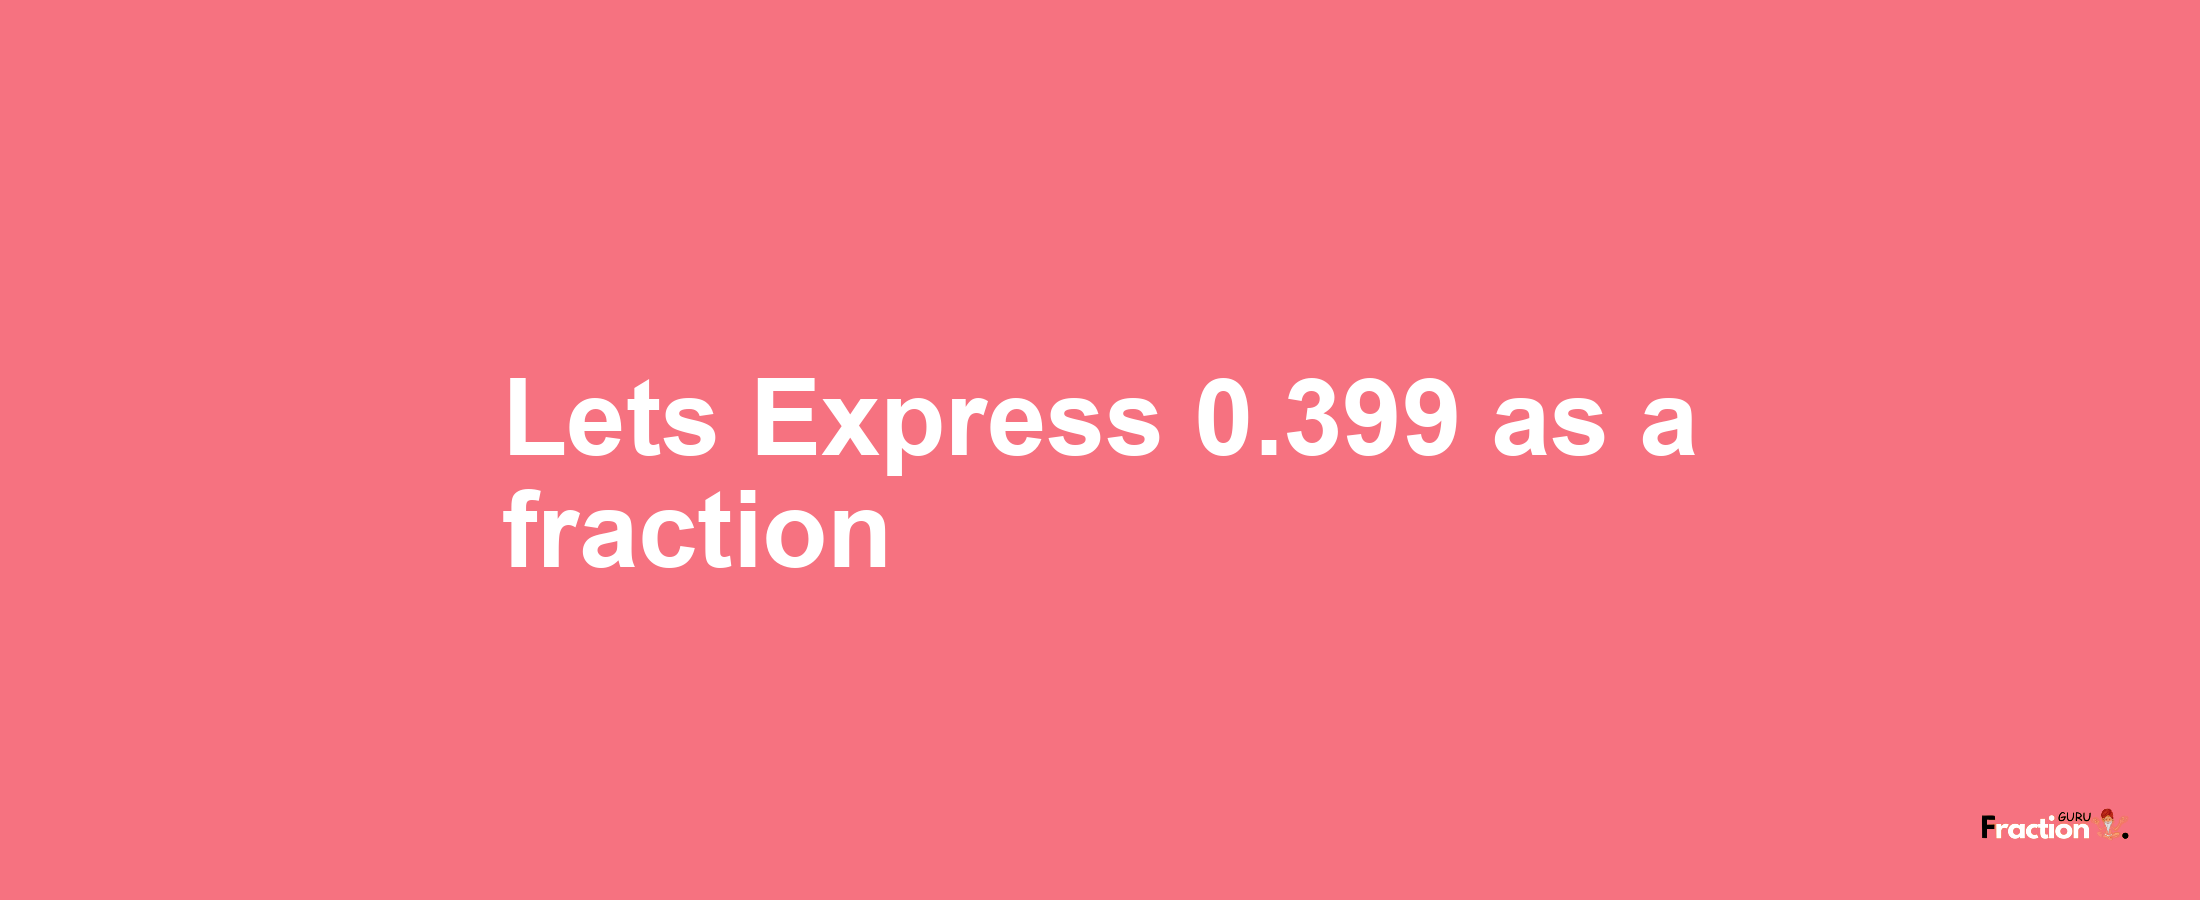 Lets Express 0.399 as afraction